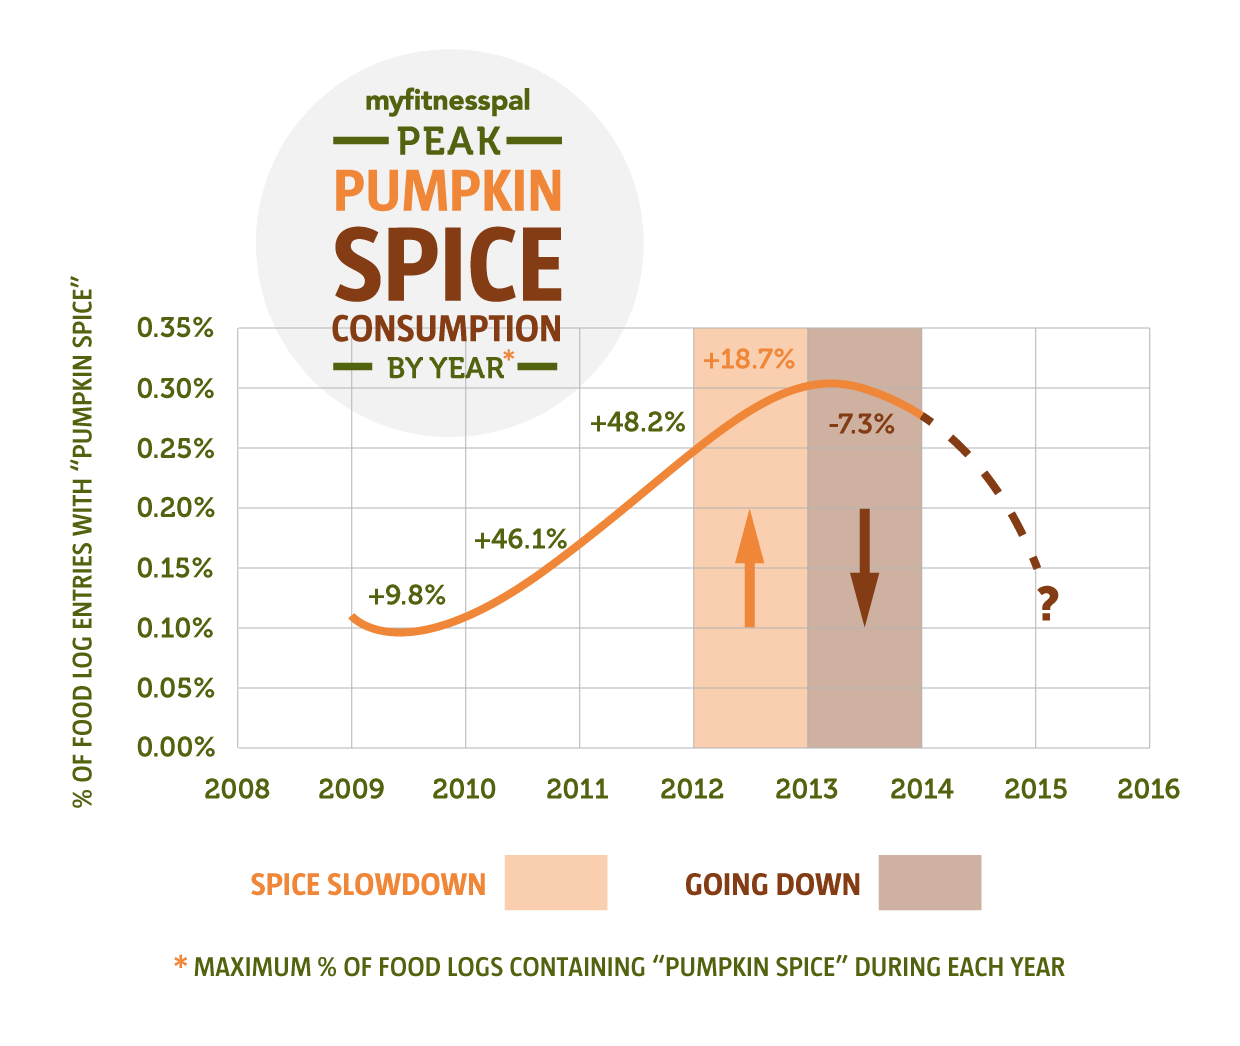 consumption-by-year